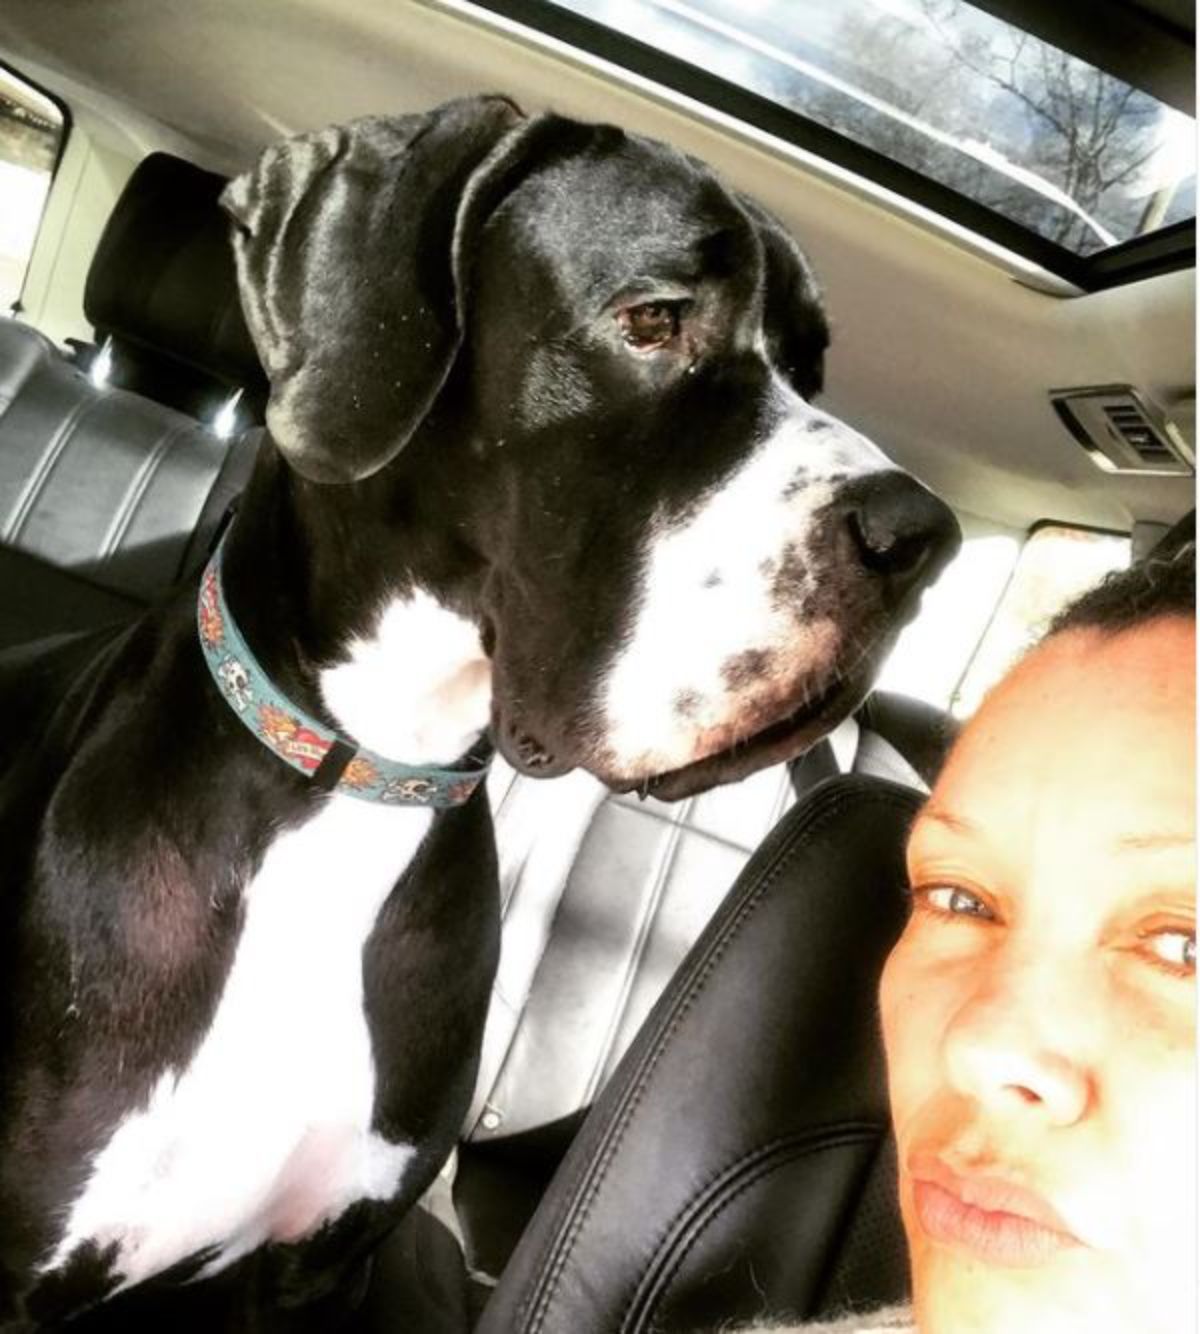 Vanessa Williams taking a selfie inside the car with her Great Dane dog